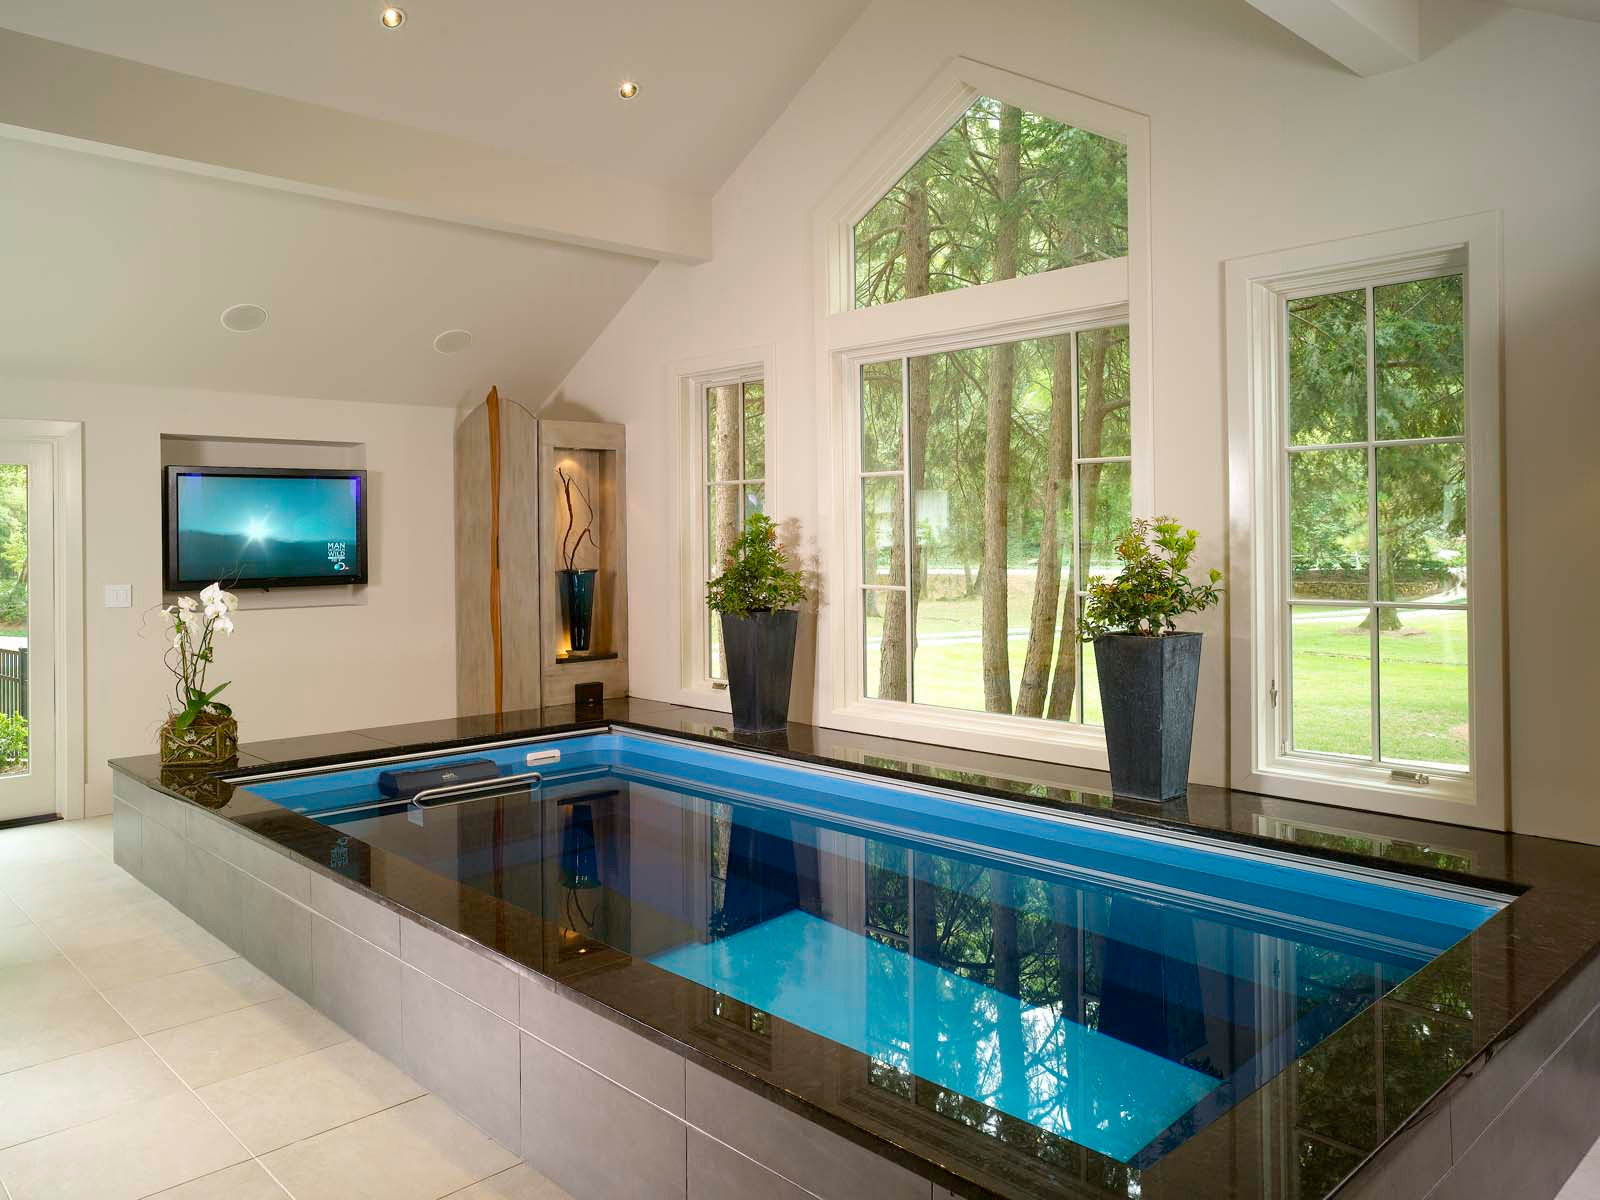 75 Beautiful Indoor Pool Pictures Ideas January 2021 Houzz